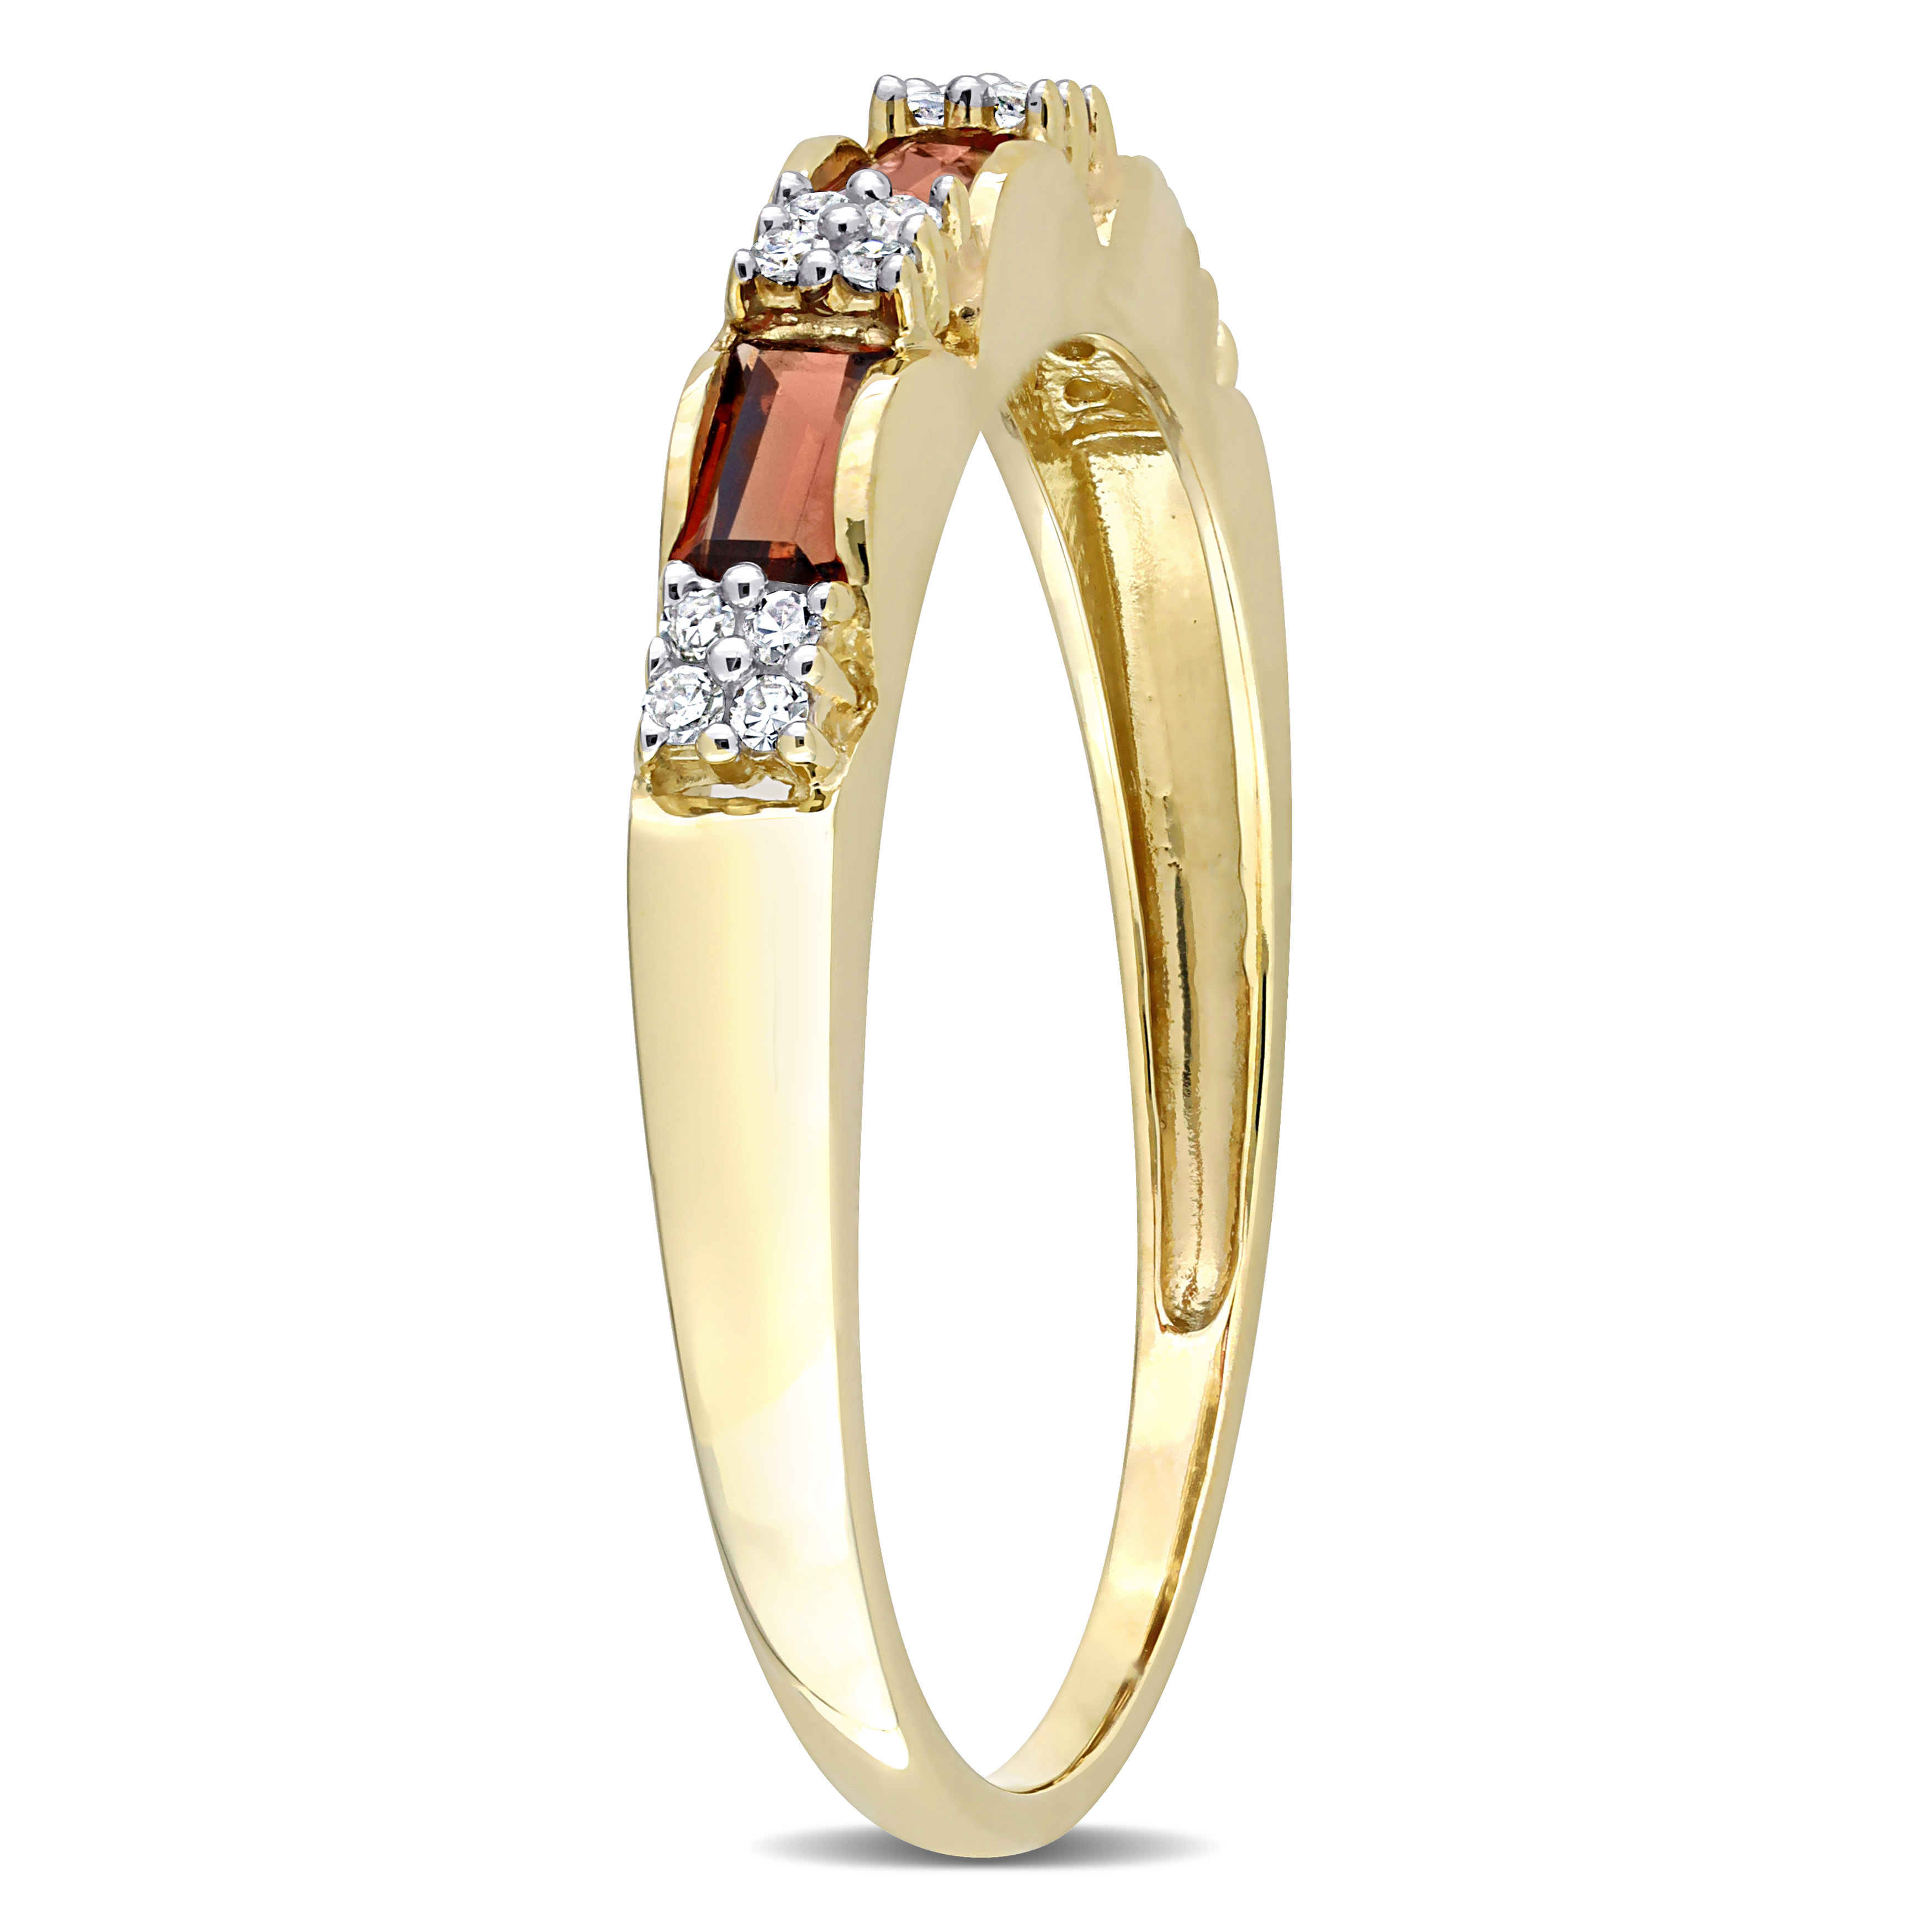 1/2 CT TGW Garnet and Diamond Accent Eternity Ring in 10k Yellow Gold